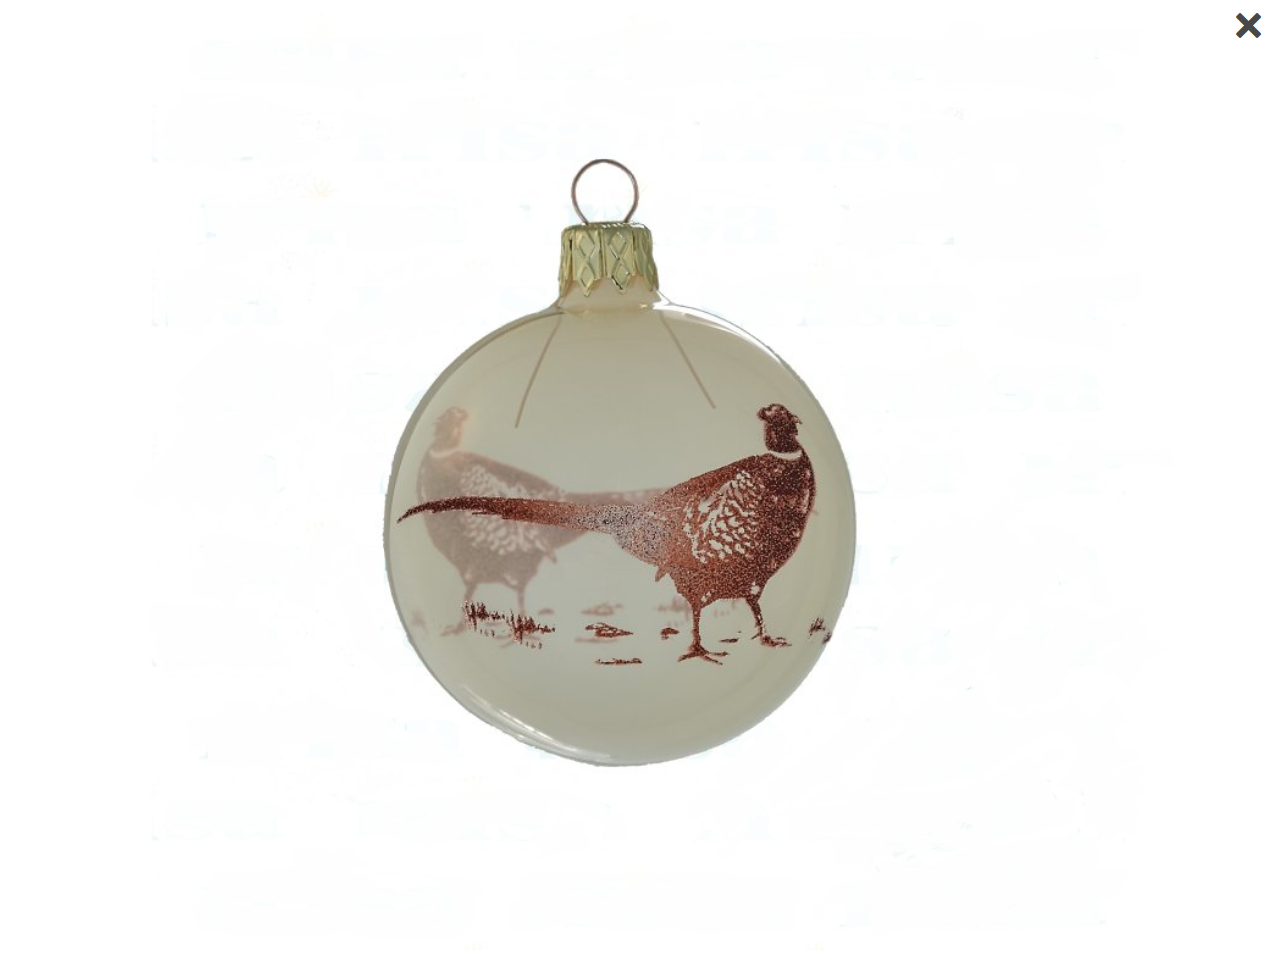 Misty Forest Glass Ornament - Woodland glass ornament handcrafted in Europe, where Old World Christmas ornament making has a long tradition.